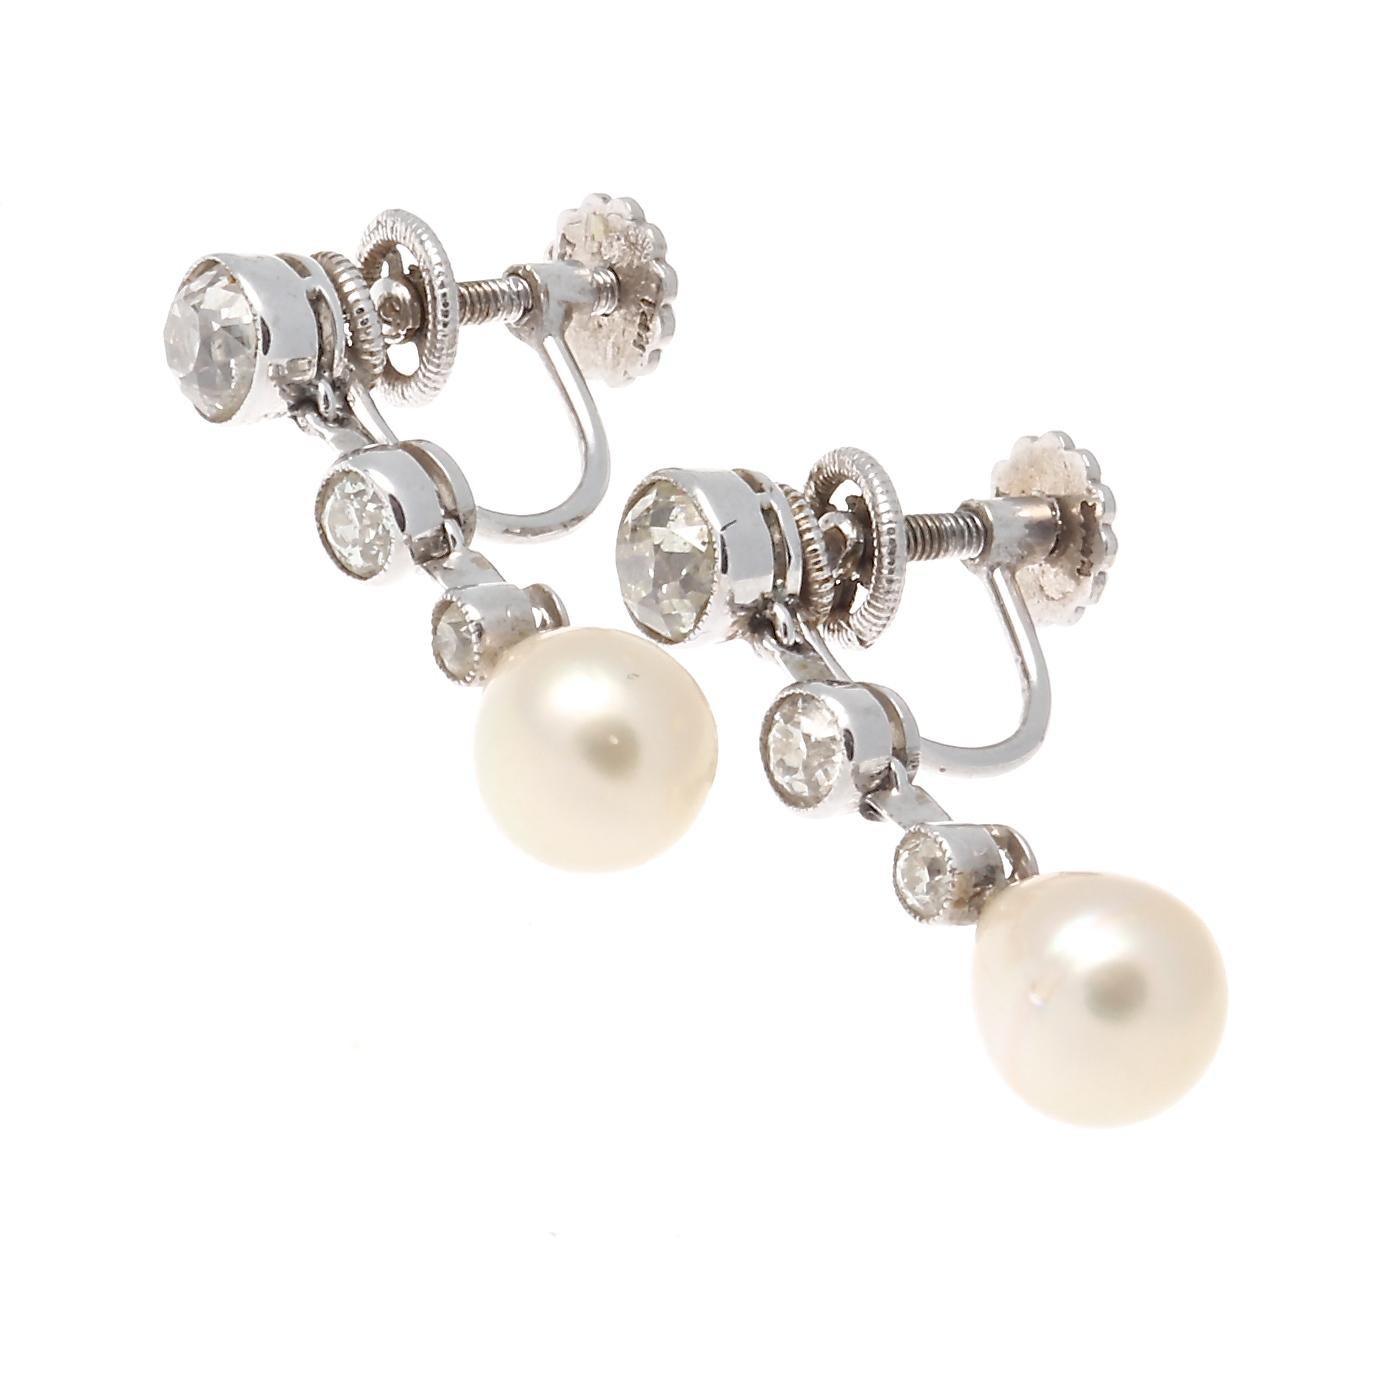 Classic Art deco earrings that are still relevant today. Featuring GIA certified cream color natural salt water pearls hanging from a strand of near colorless old cut diamond. Hand crafted in platinum. 1 inch long.